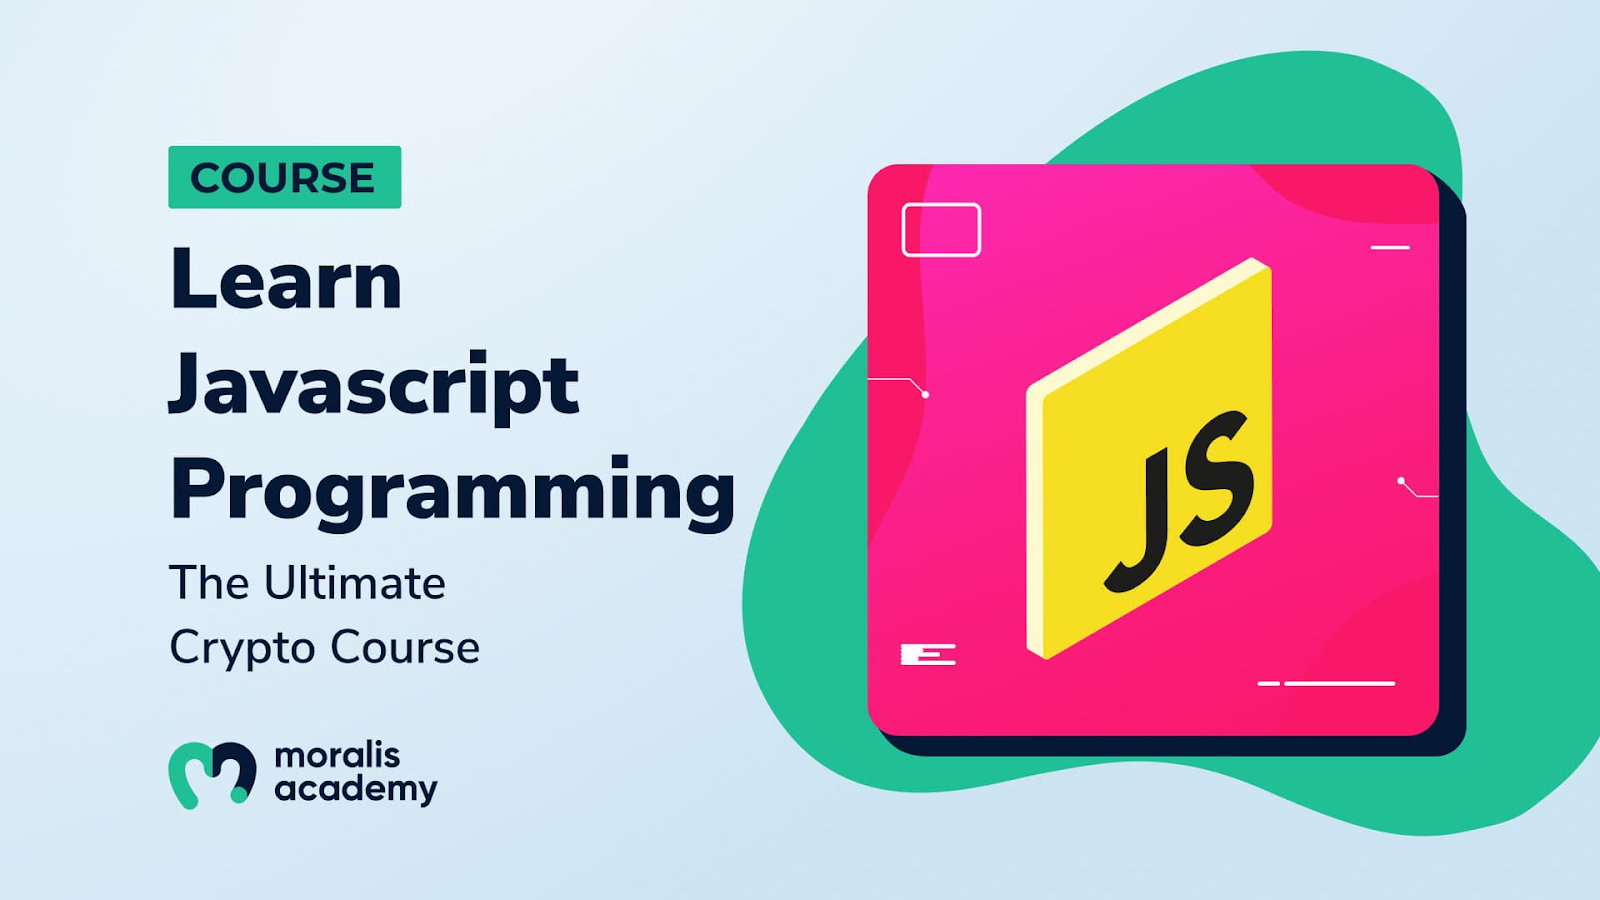 After answering the "what is Sweatcoin?" question, learn JavaScript programming from scratch at Moralis Academy!